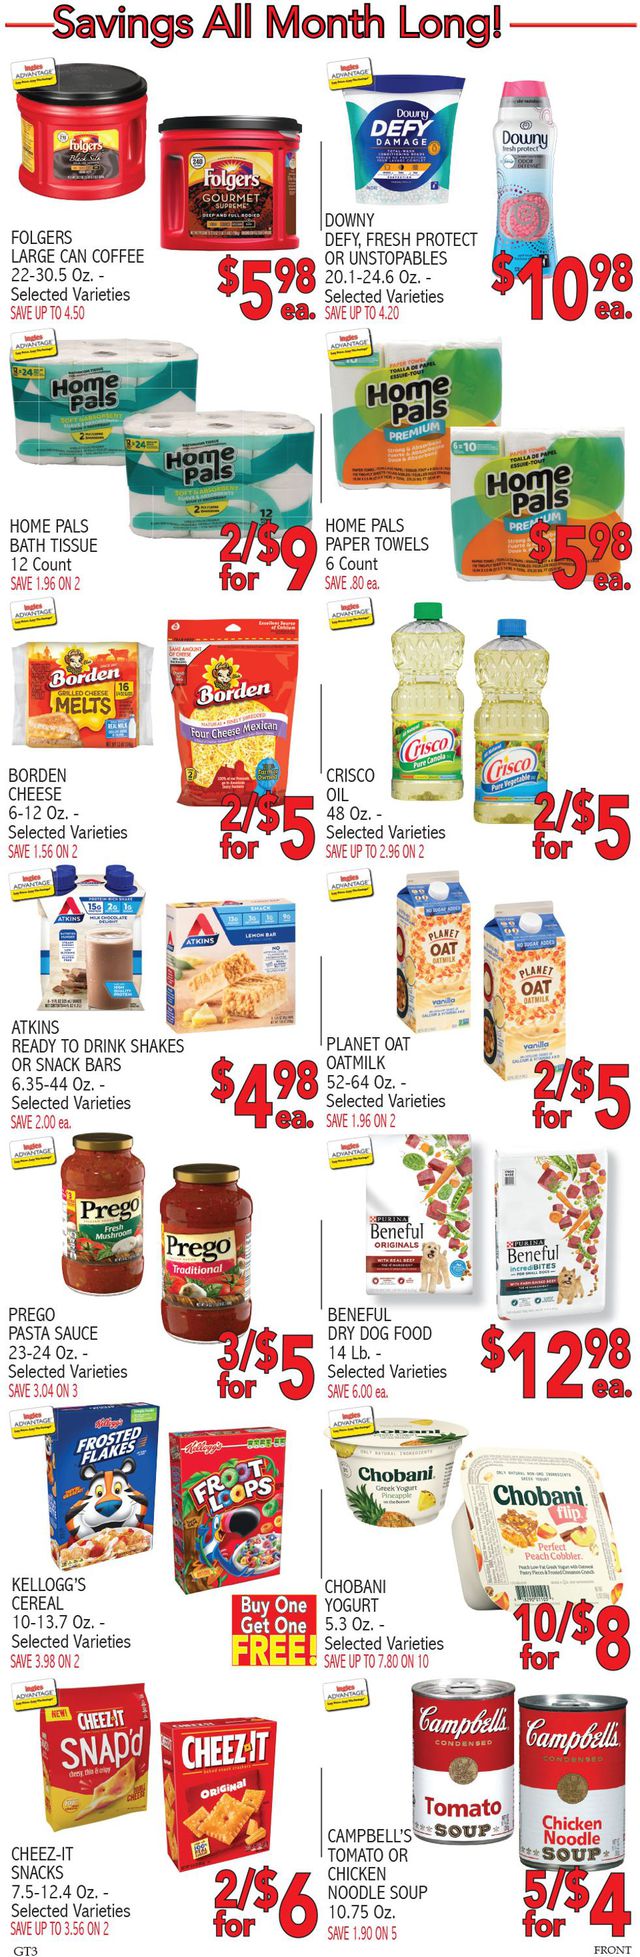 Ingles Ad from 01/06/2021